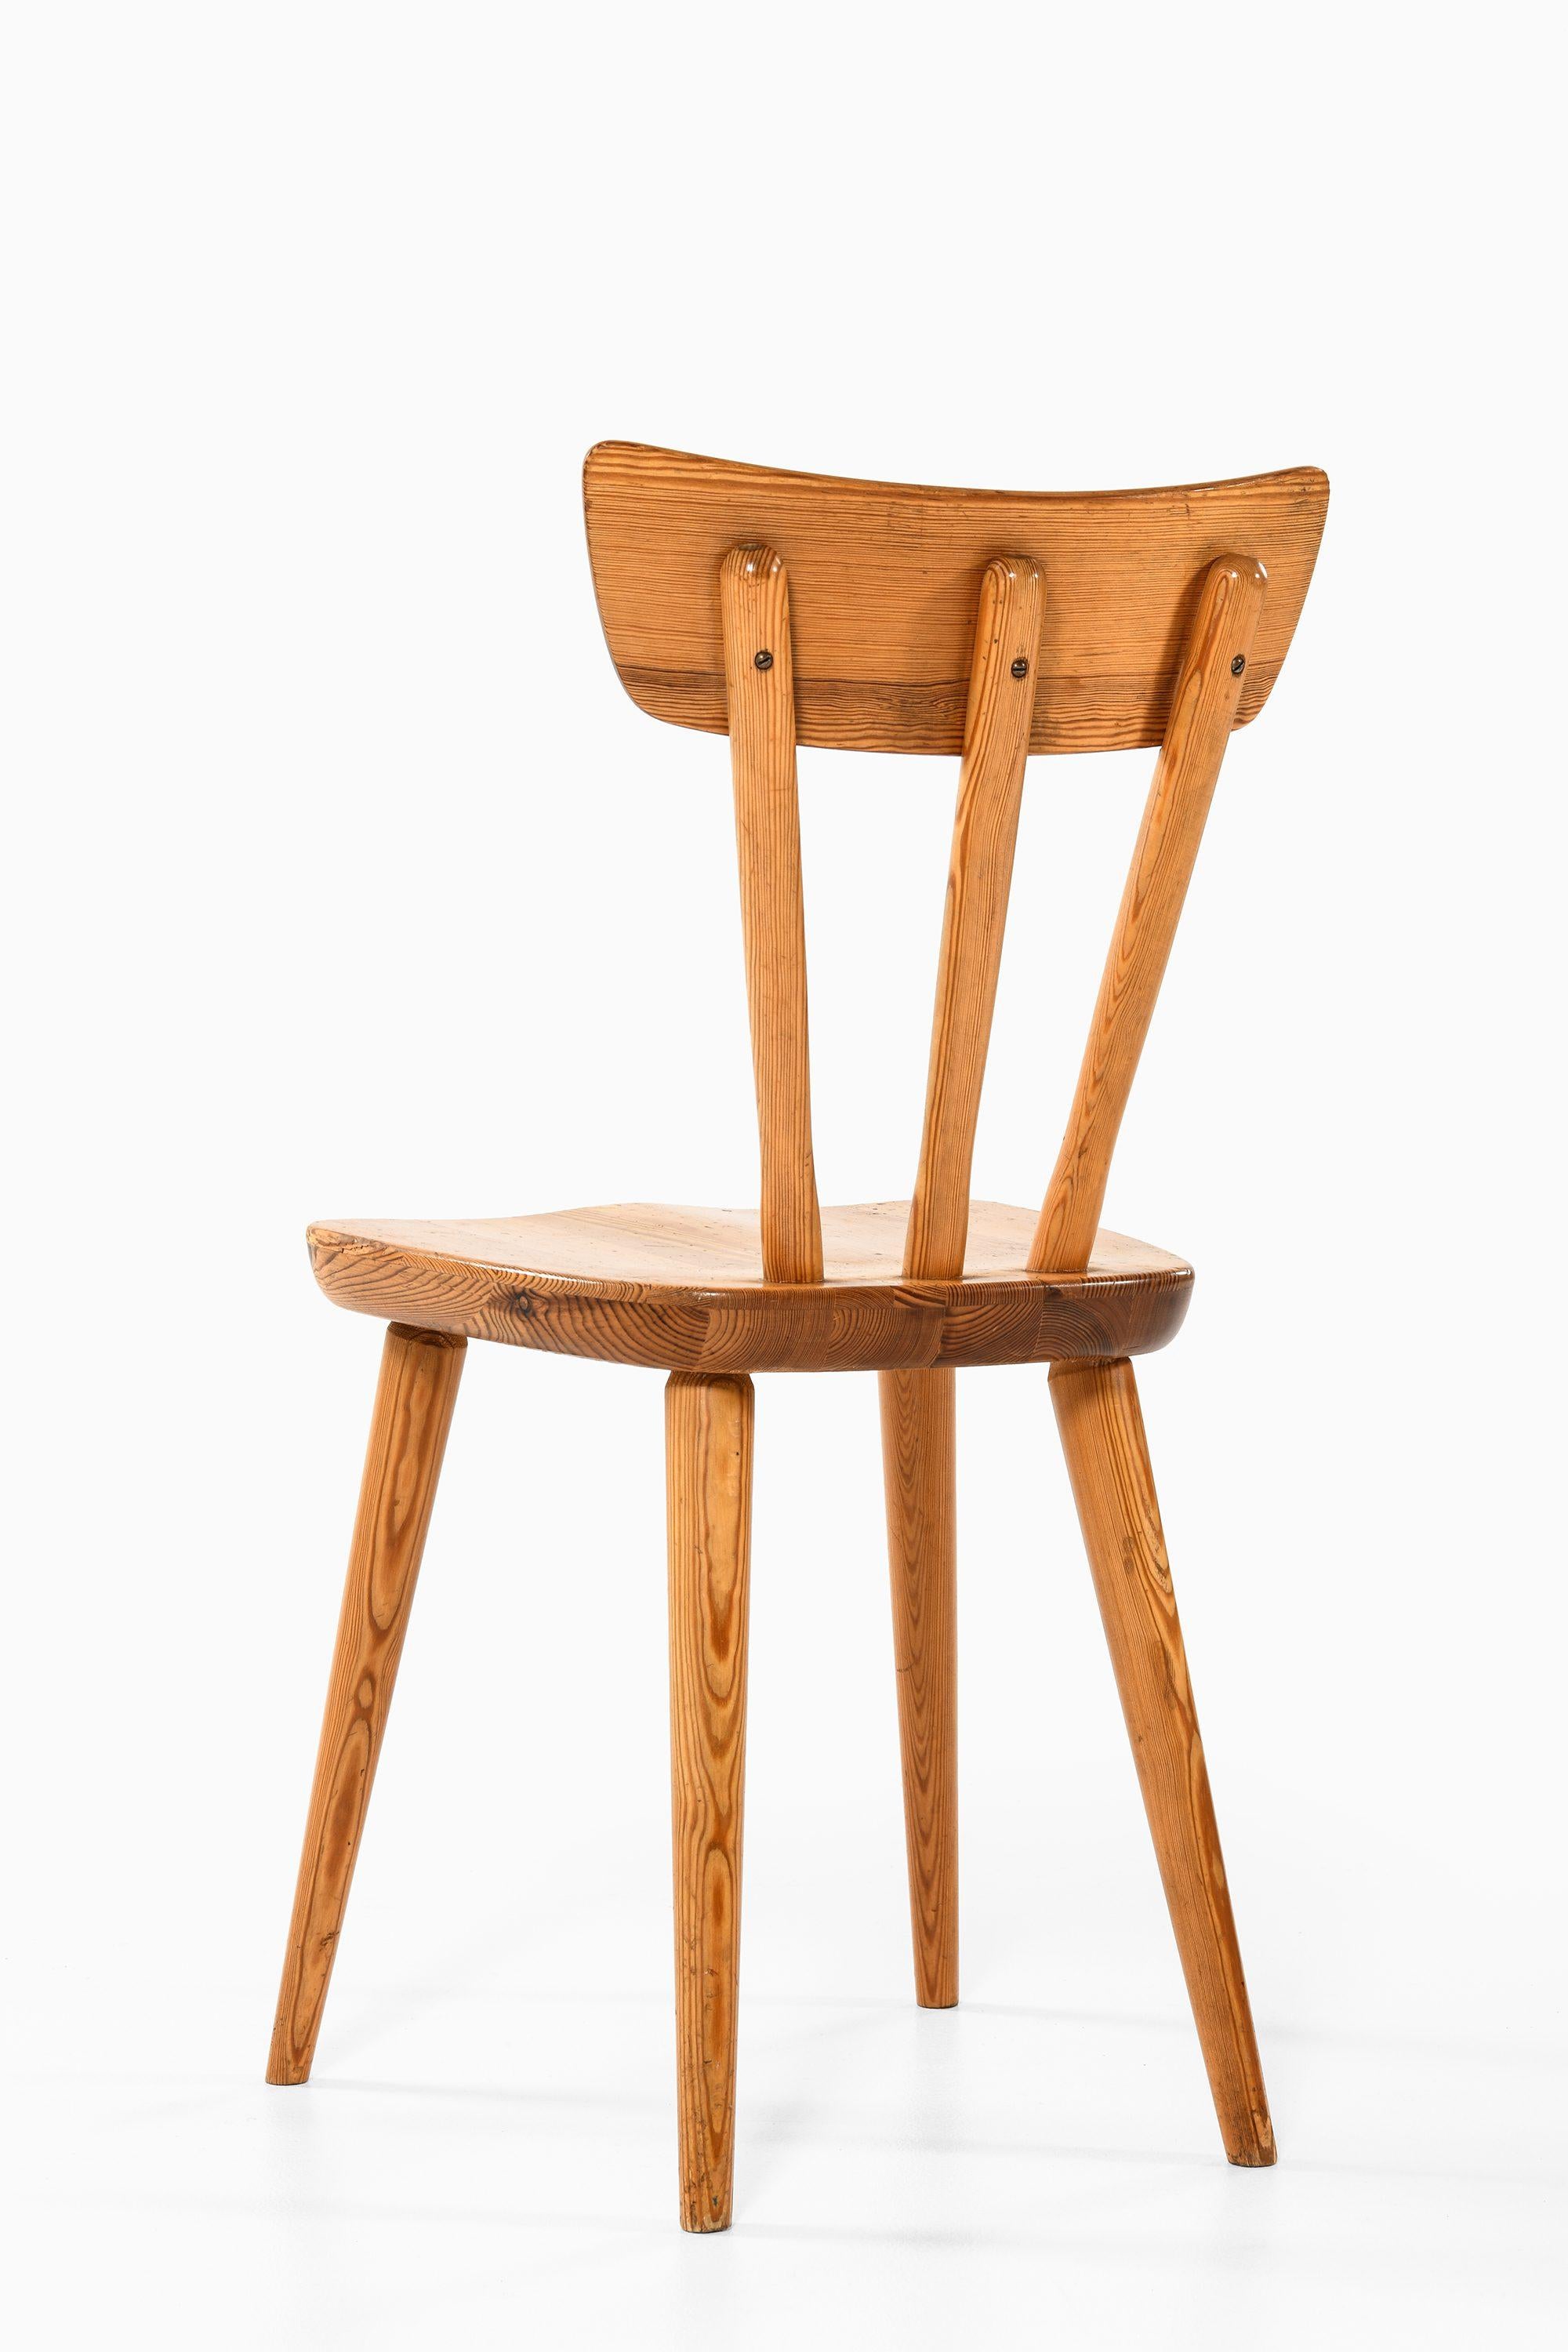 Scandinavian Modern Set of 8 Dining Chairs in Solid Pine by Göran Malmvall, 1940's For Sale